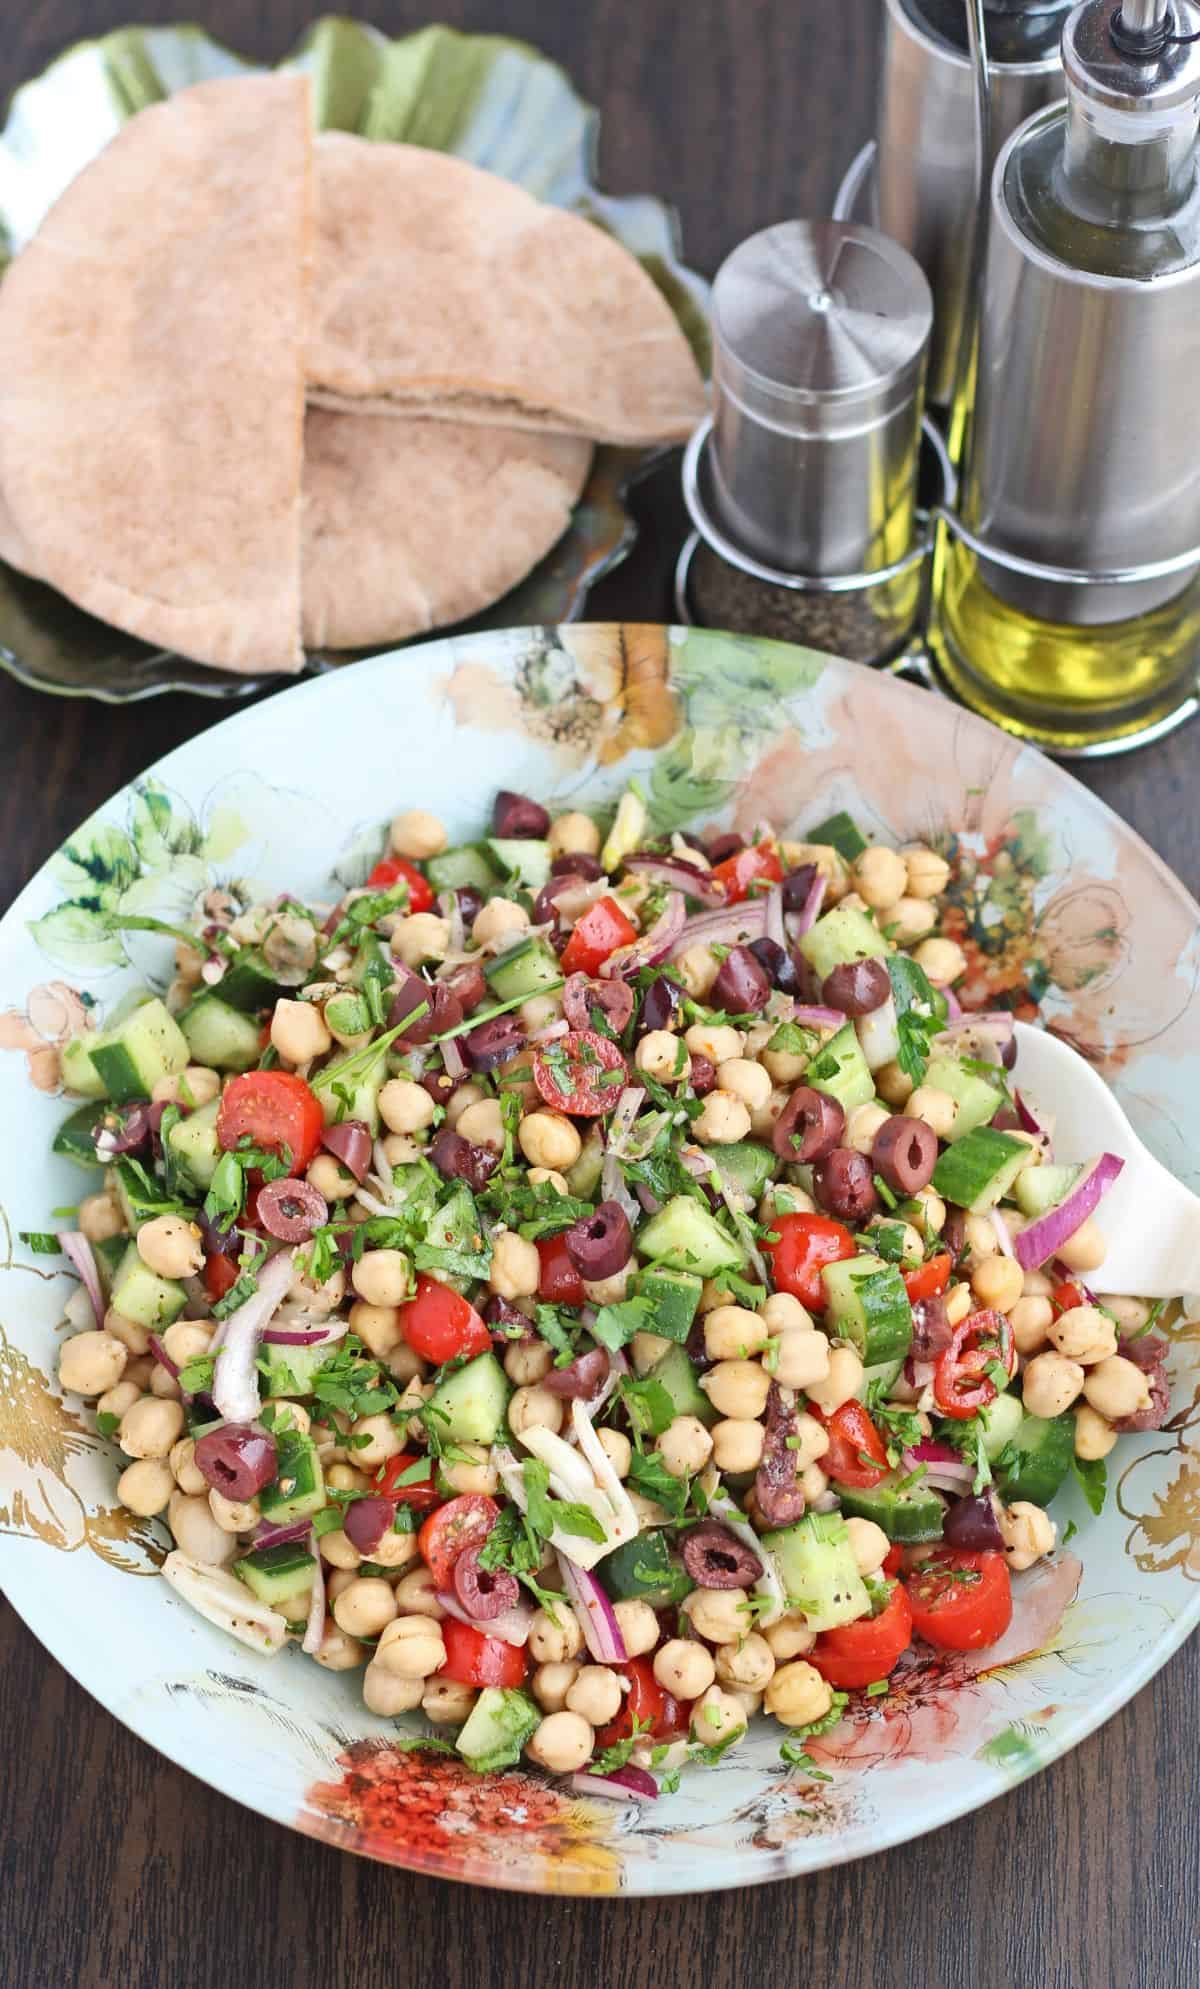 Chickpea salad in a bowl with pita bread and seasoning on side